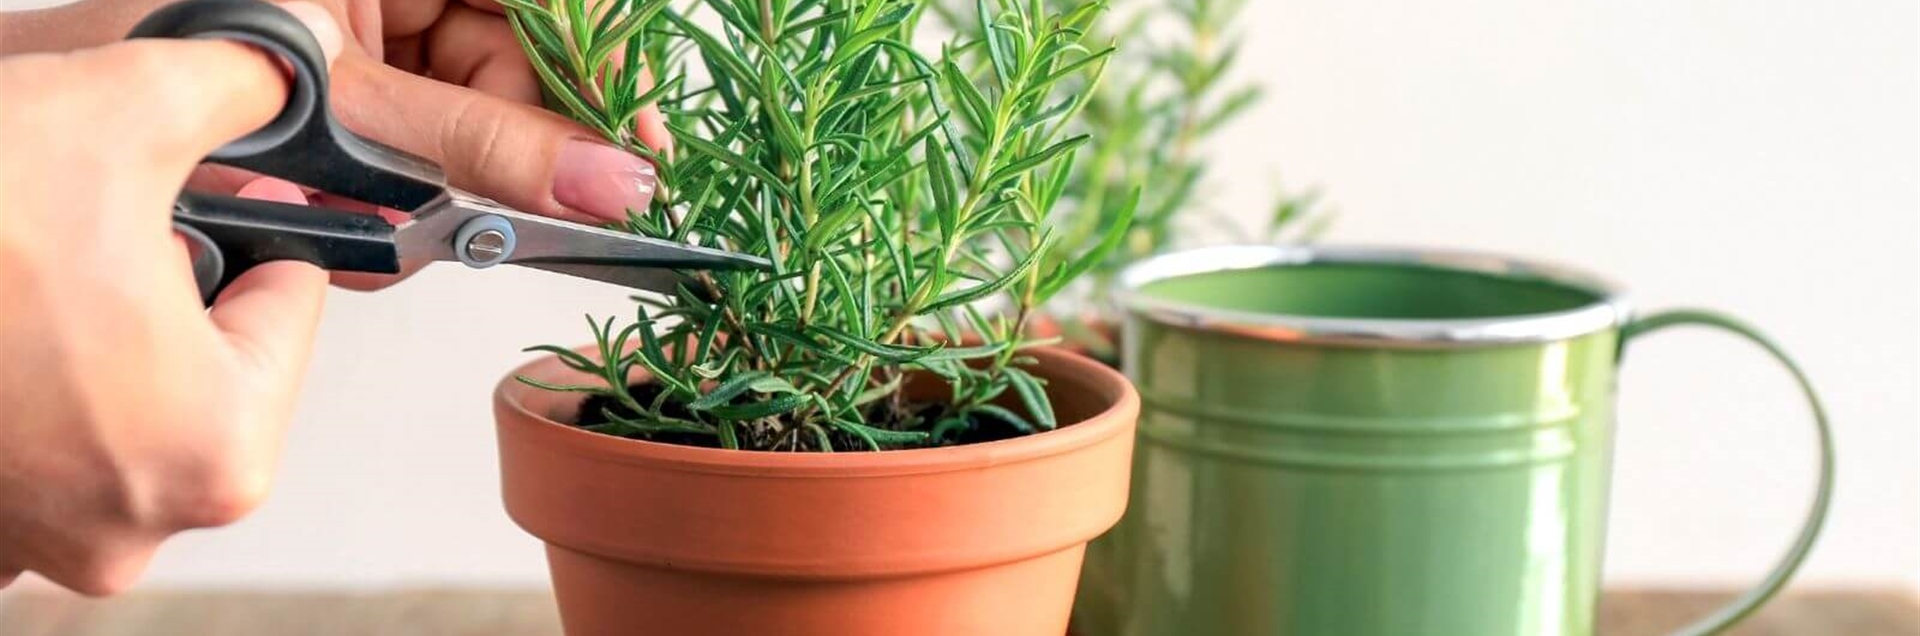 How to make a rosemary seedling from cuttings